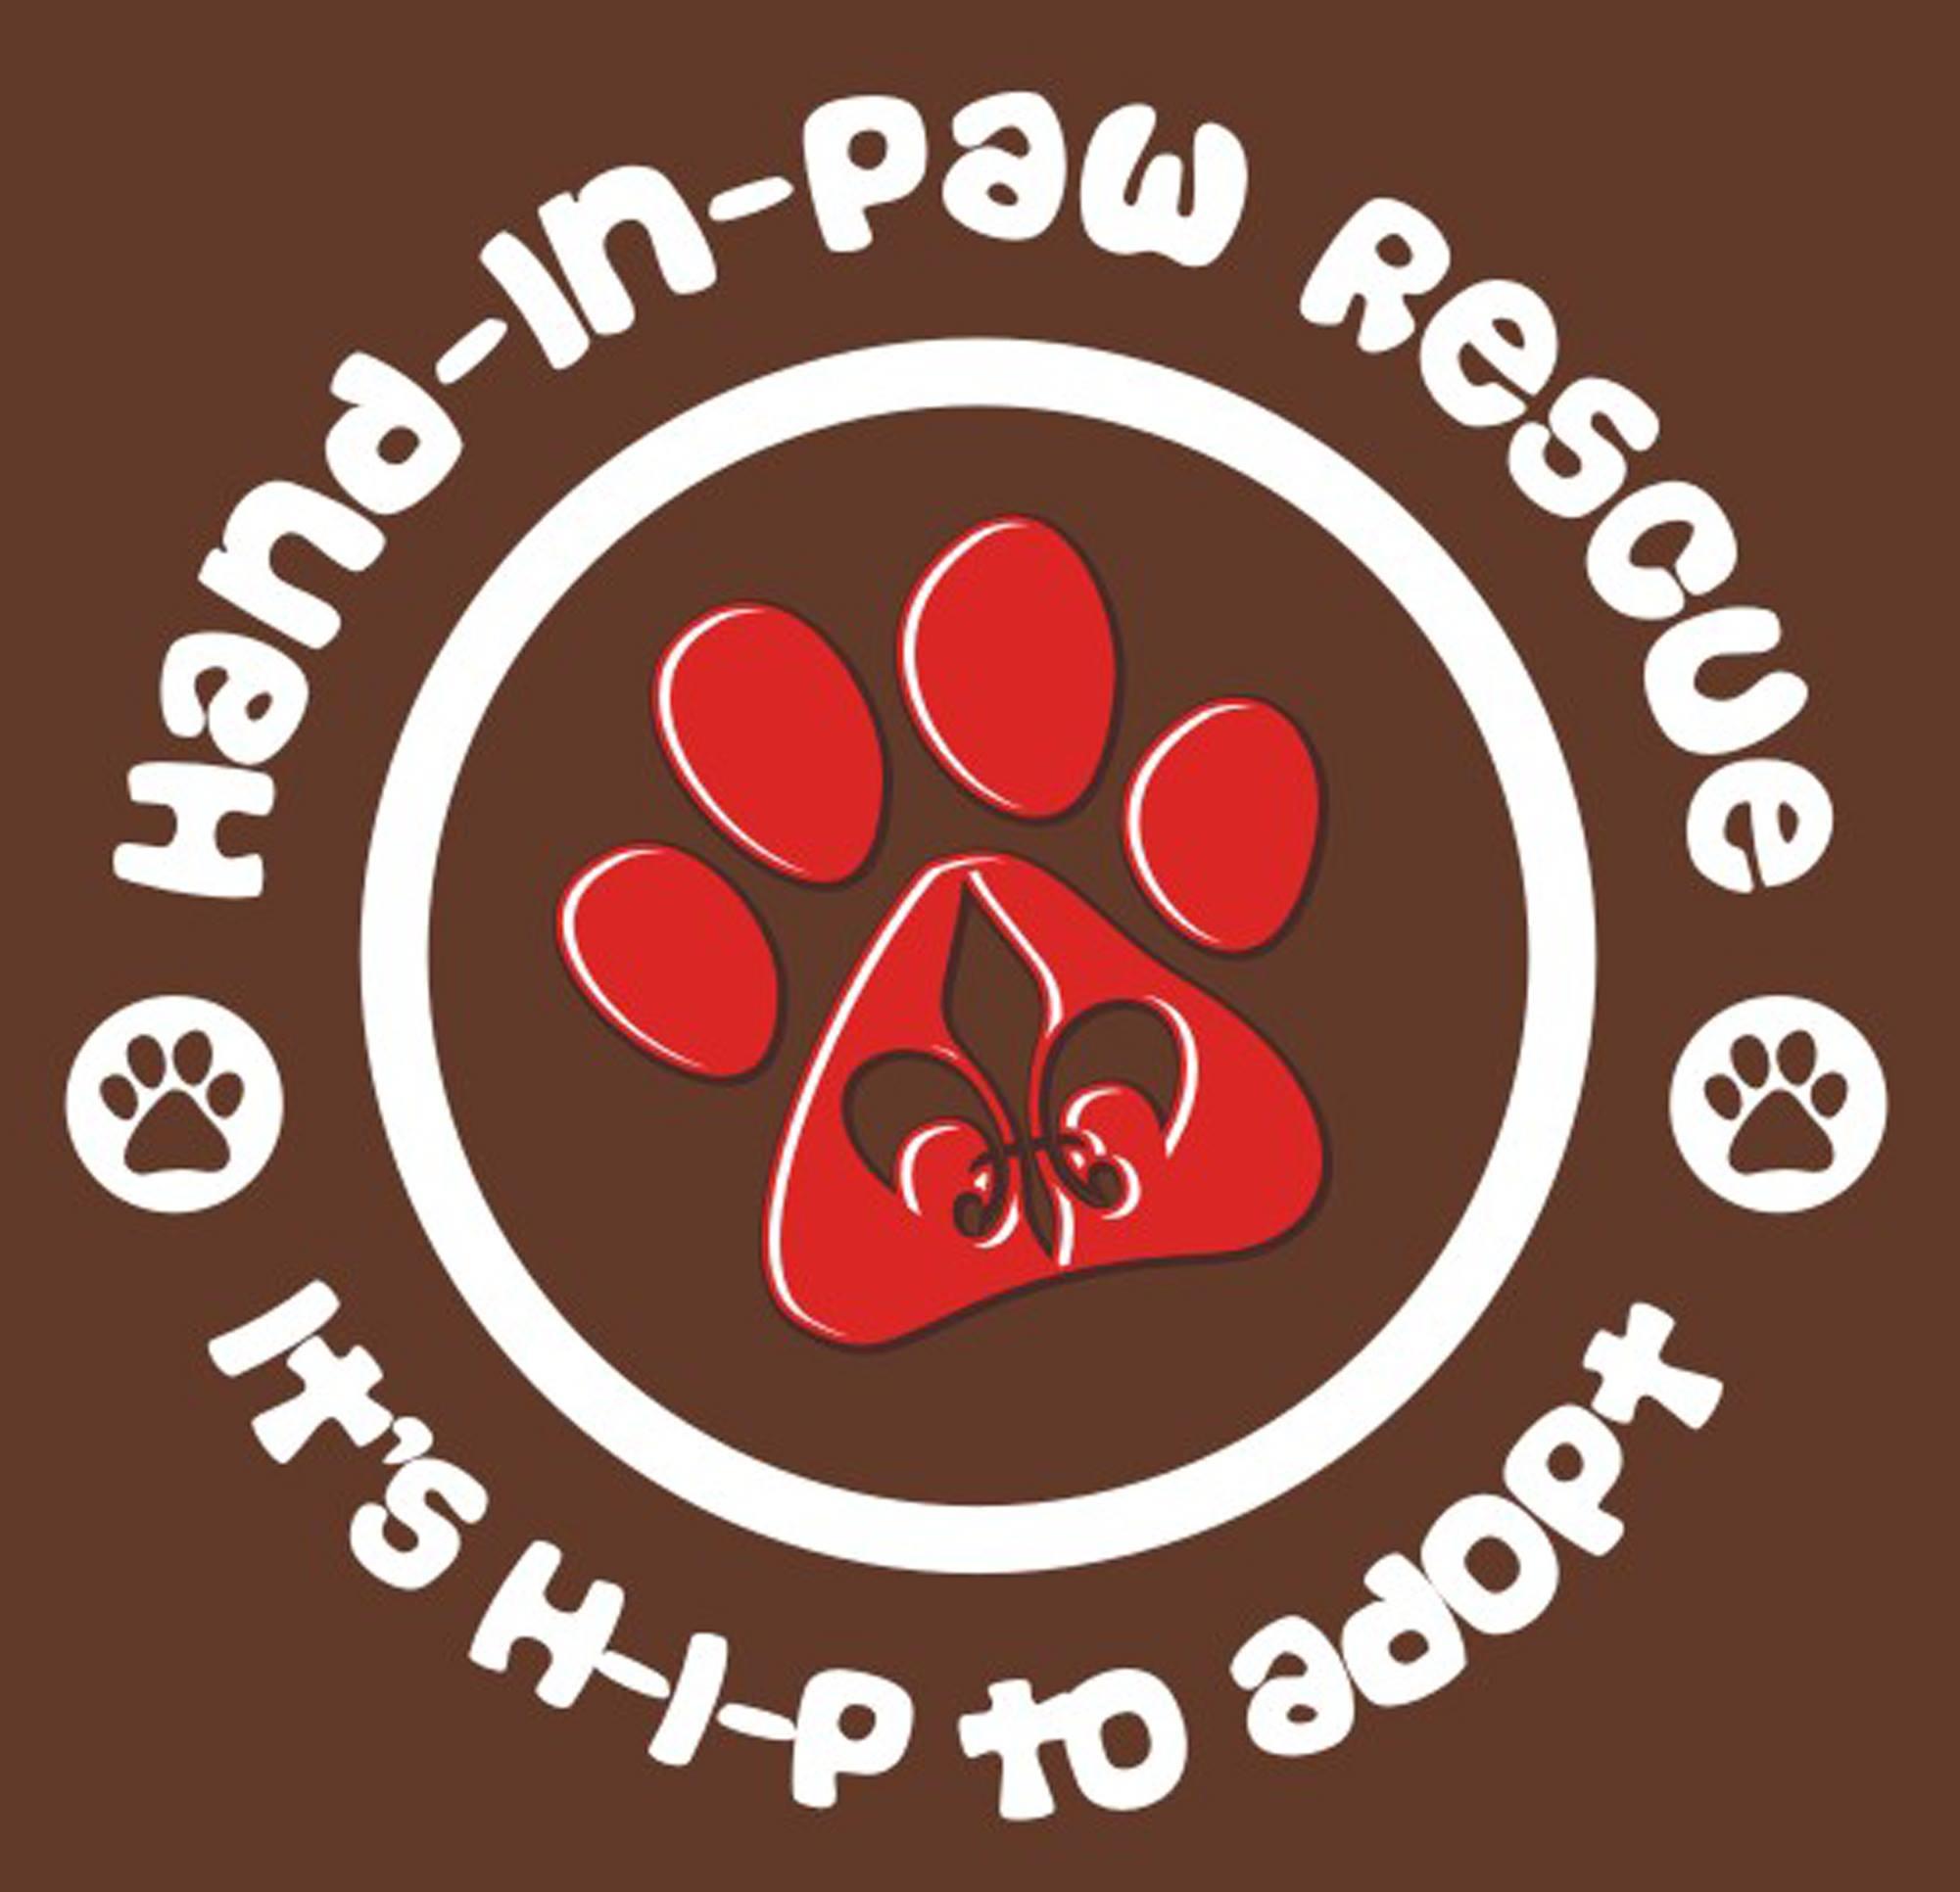 Hand-In-Paw Rescue